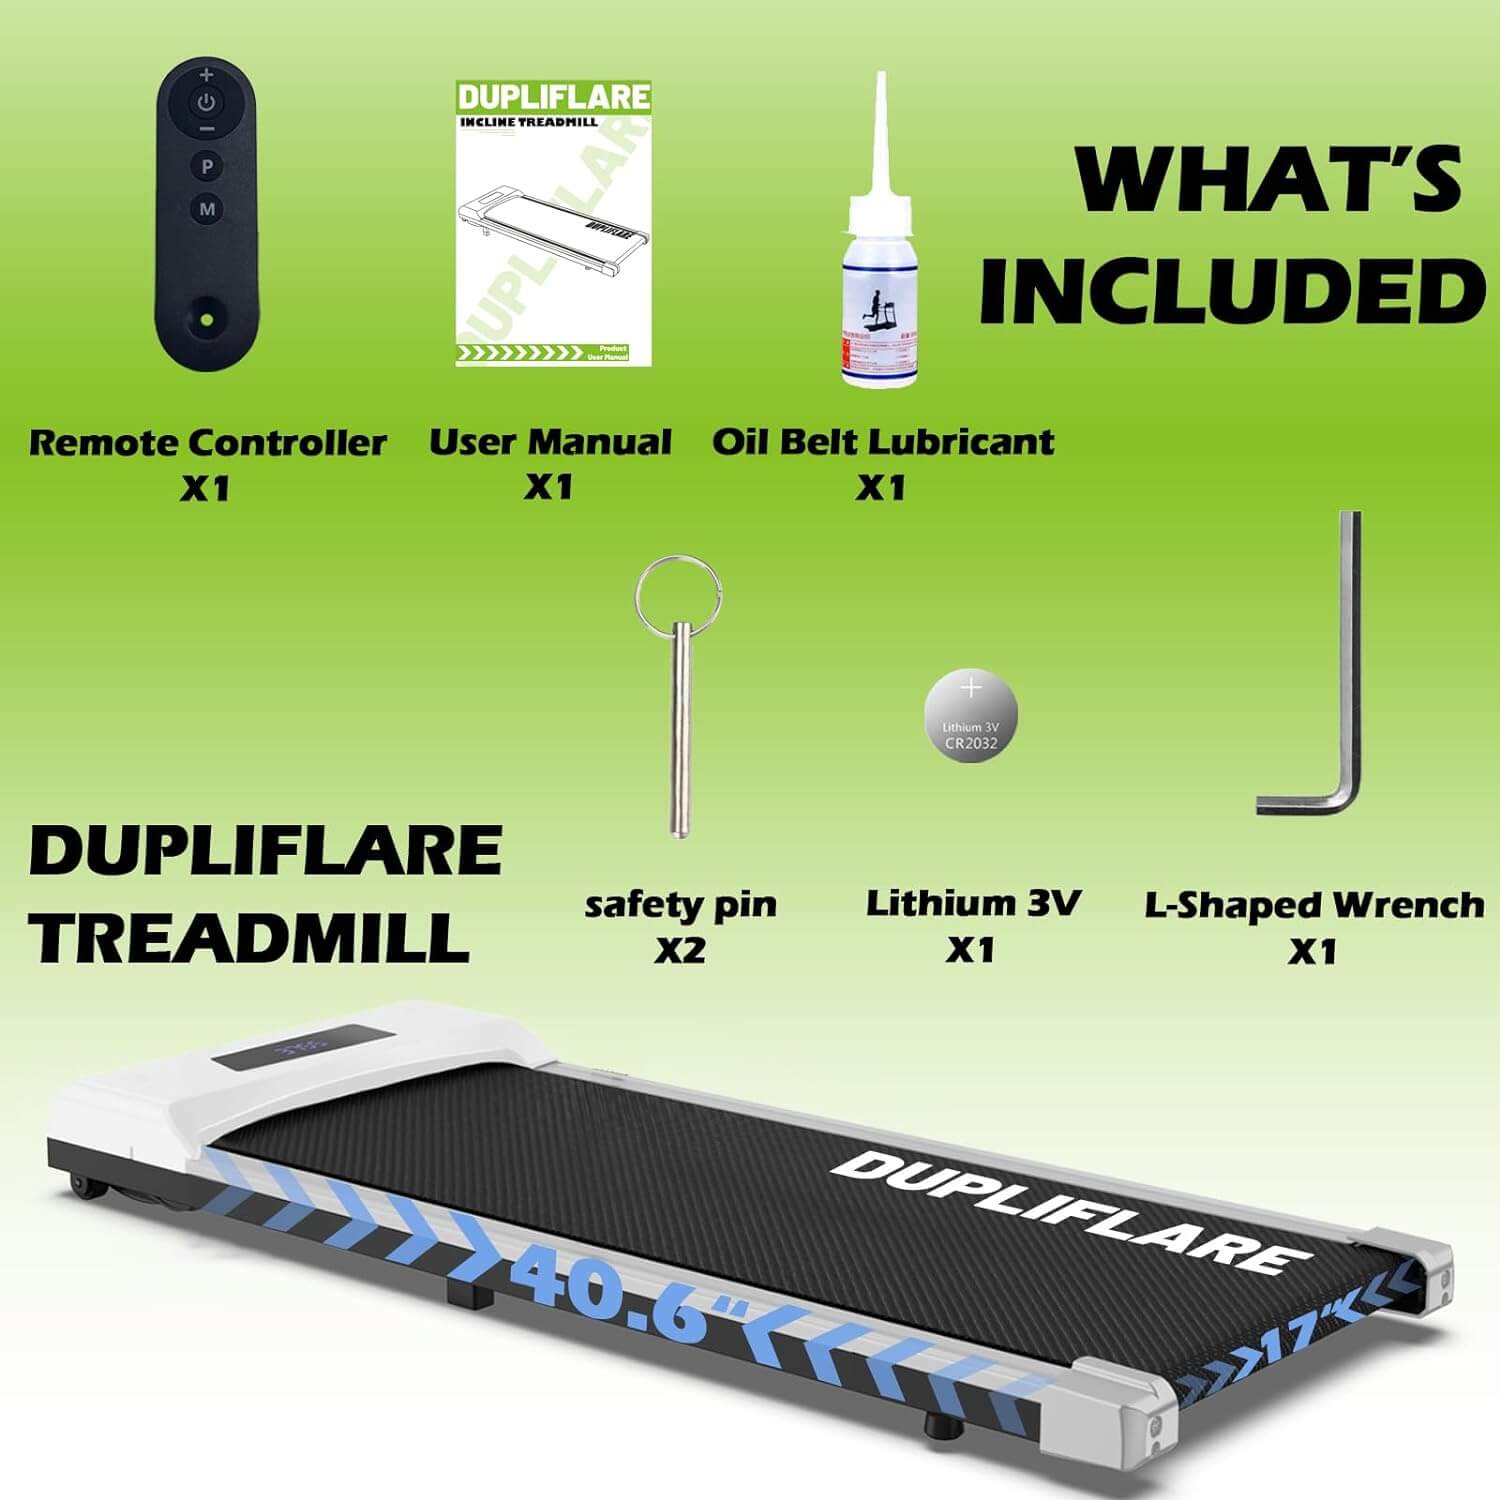 DUPLIFLARE Walking Pad With Incline product good shows, it includes a main treadmill, a remote controller, an user manual, two safety pins, a lithium 3v, a L-Shaped Wrench, and an oil belt lubricant.